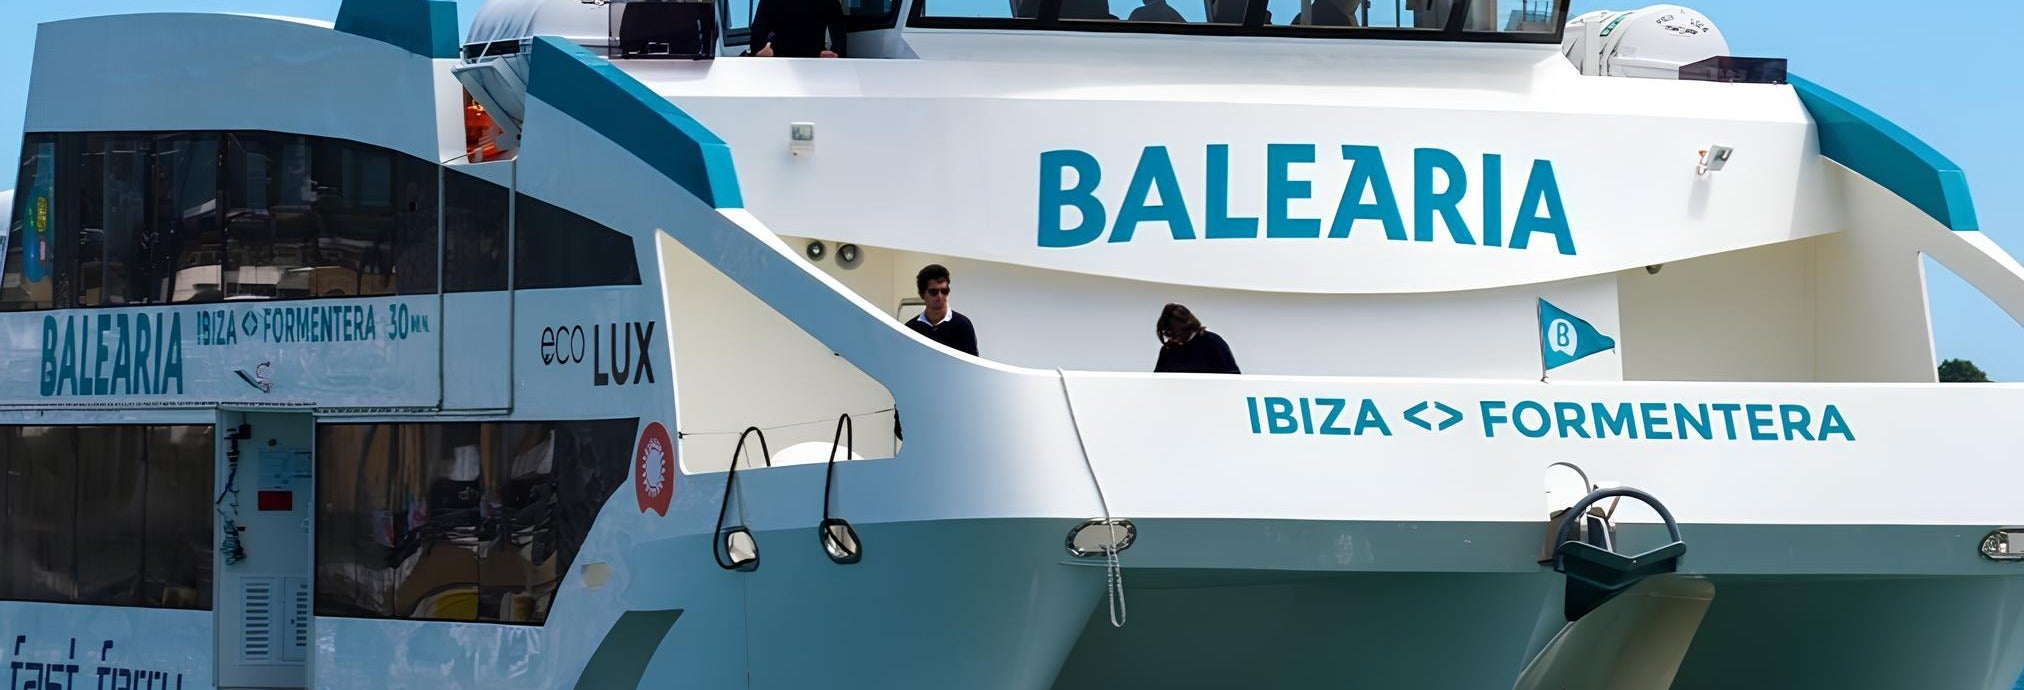 Ferry to Formentera with Balearia